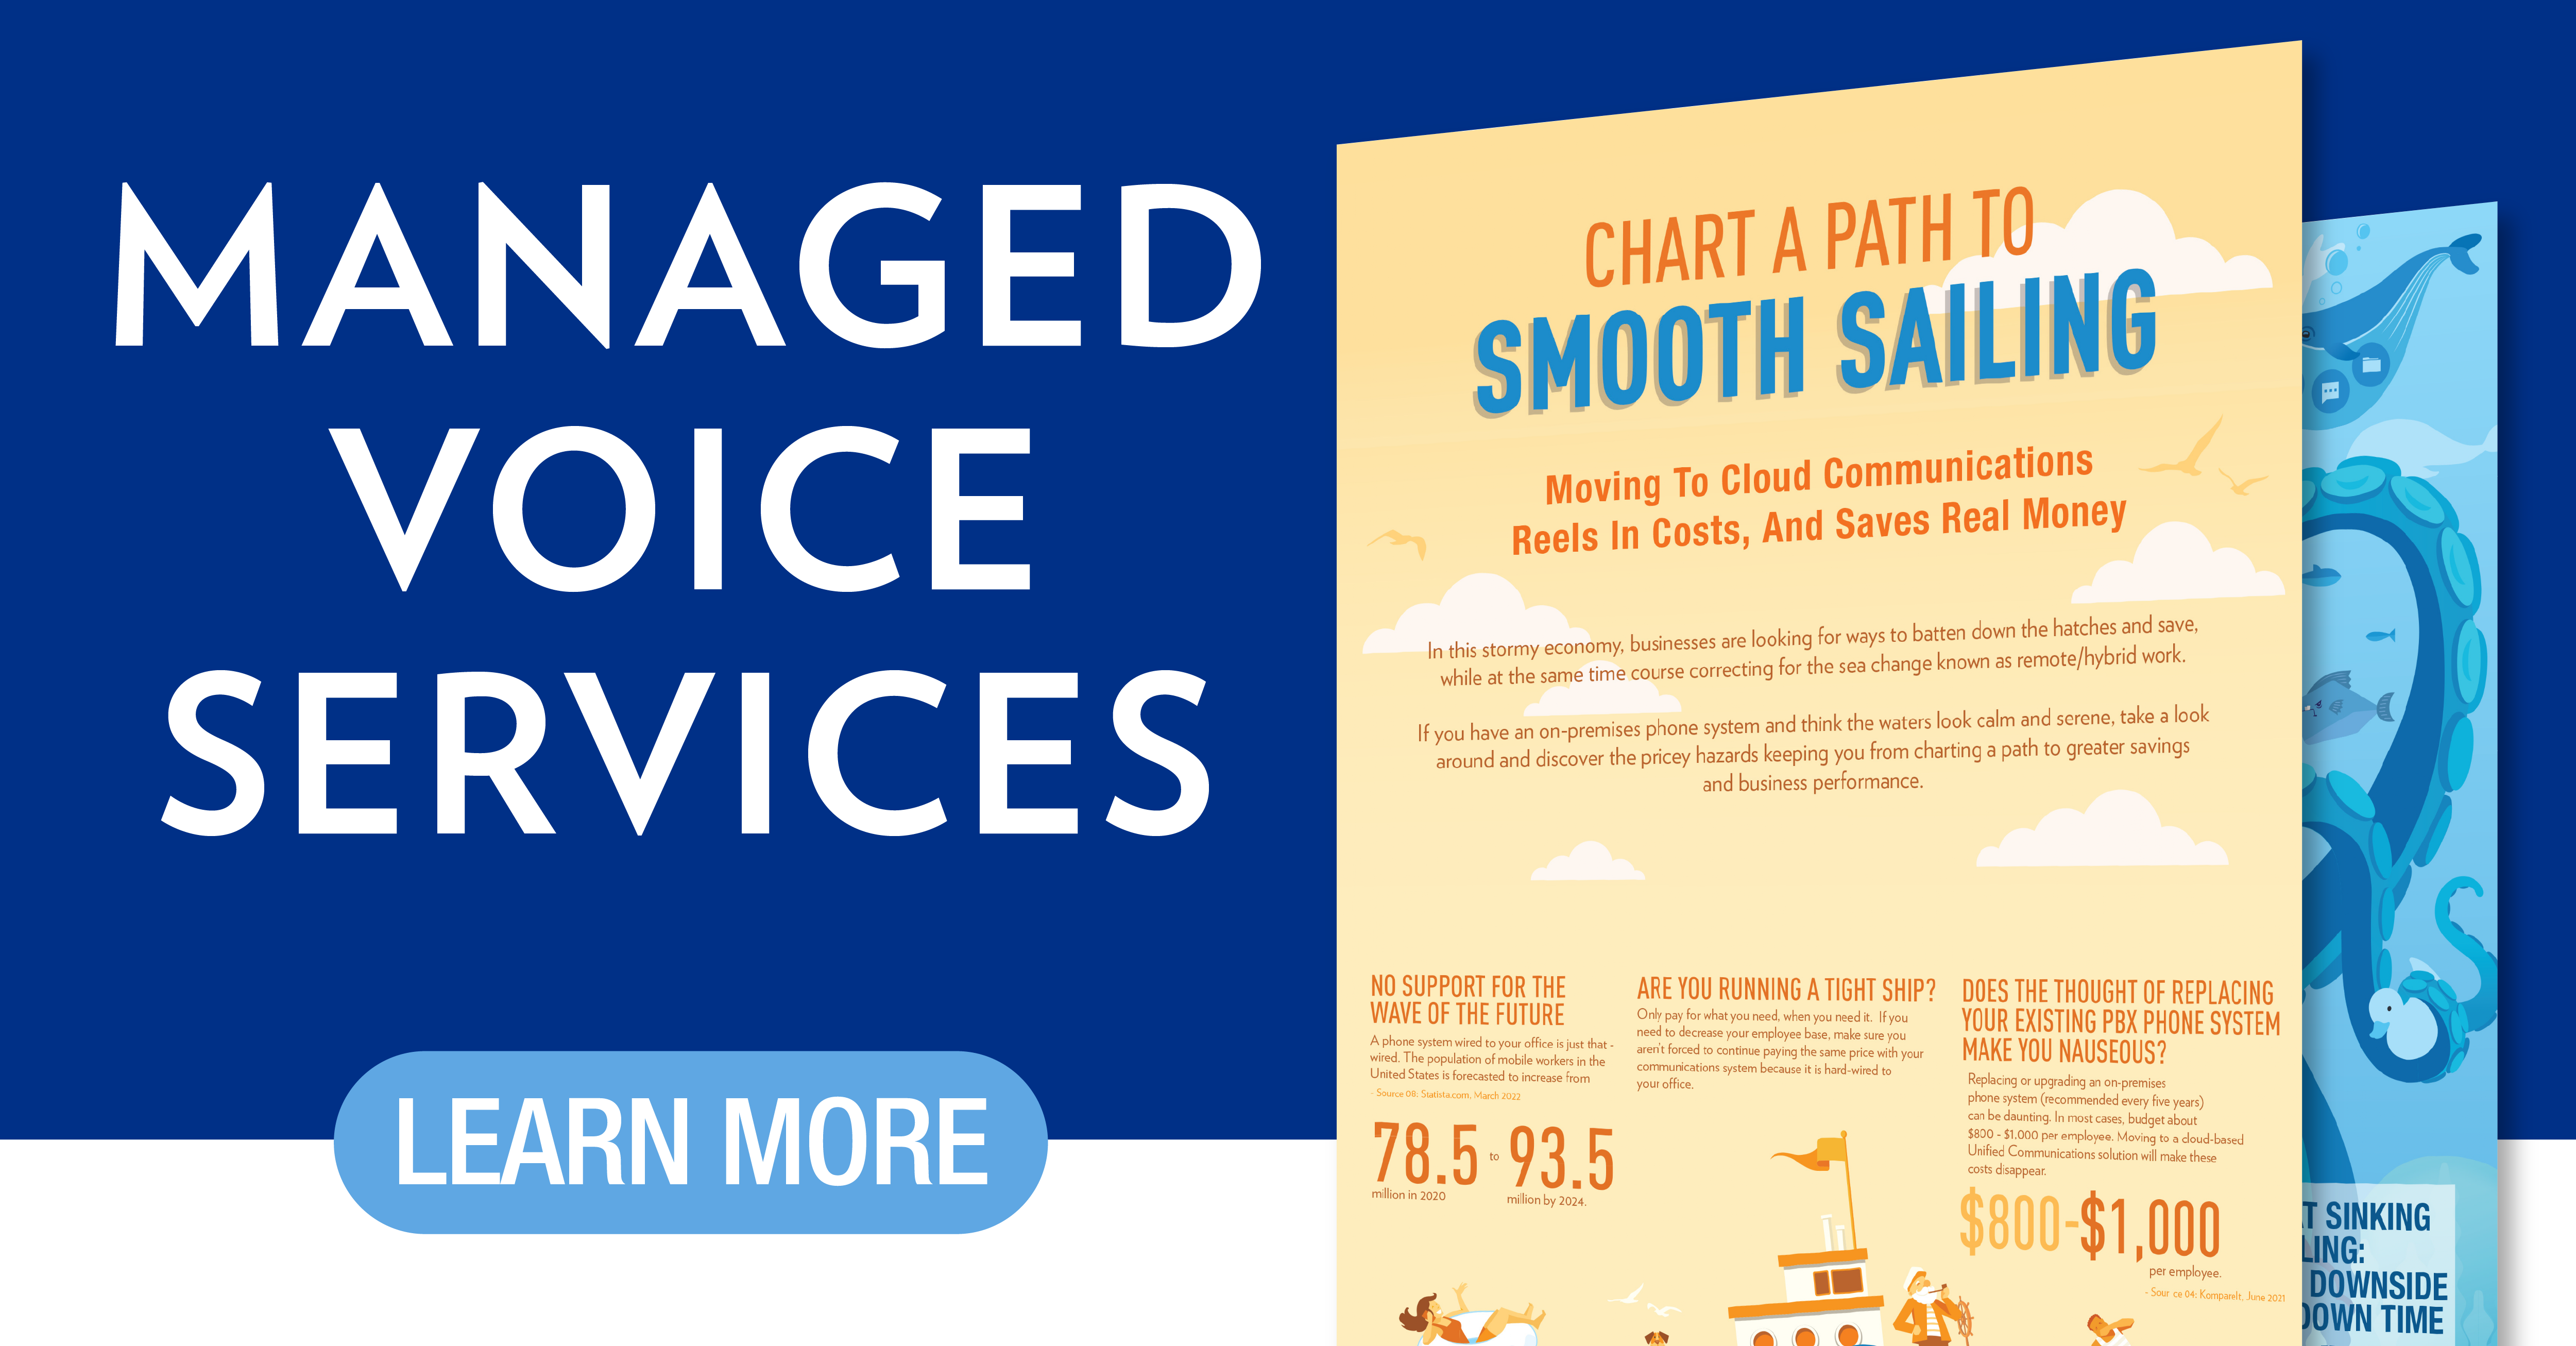 Elevate_Managed-Voice_Smooth-Sailing-Banners_LinkedIn